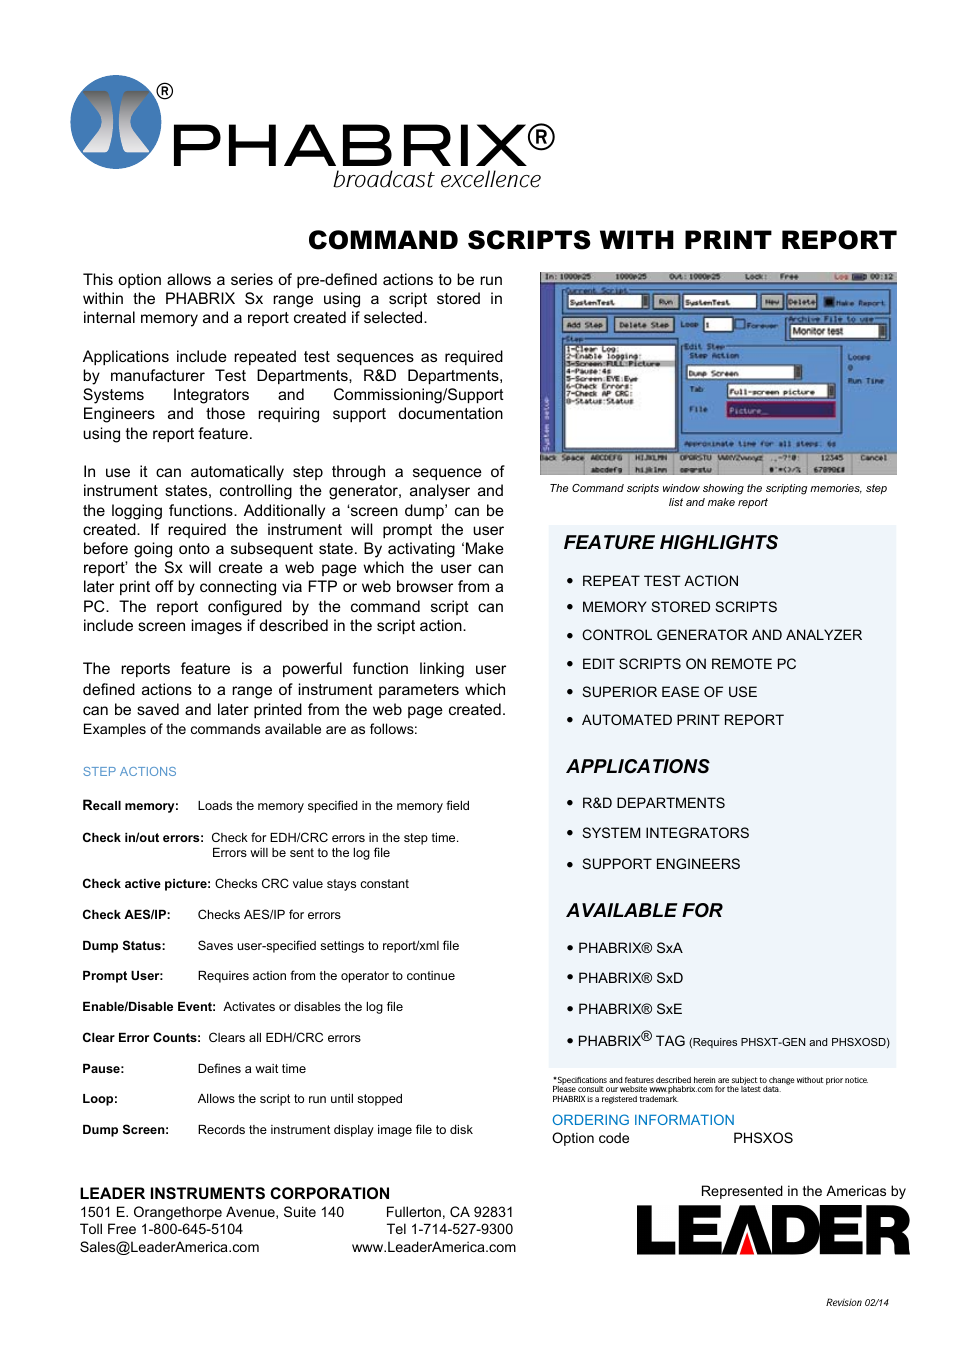 PHABRIX COMMAND SCRIPTS WITH PRINT REPORT